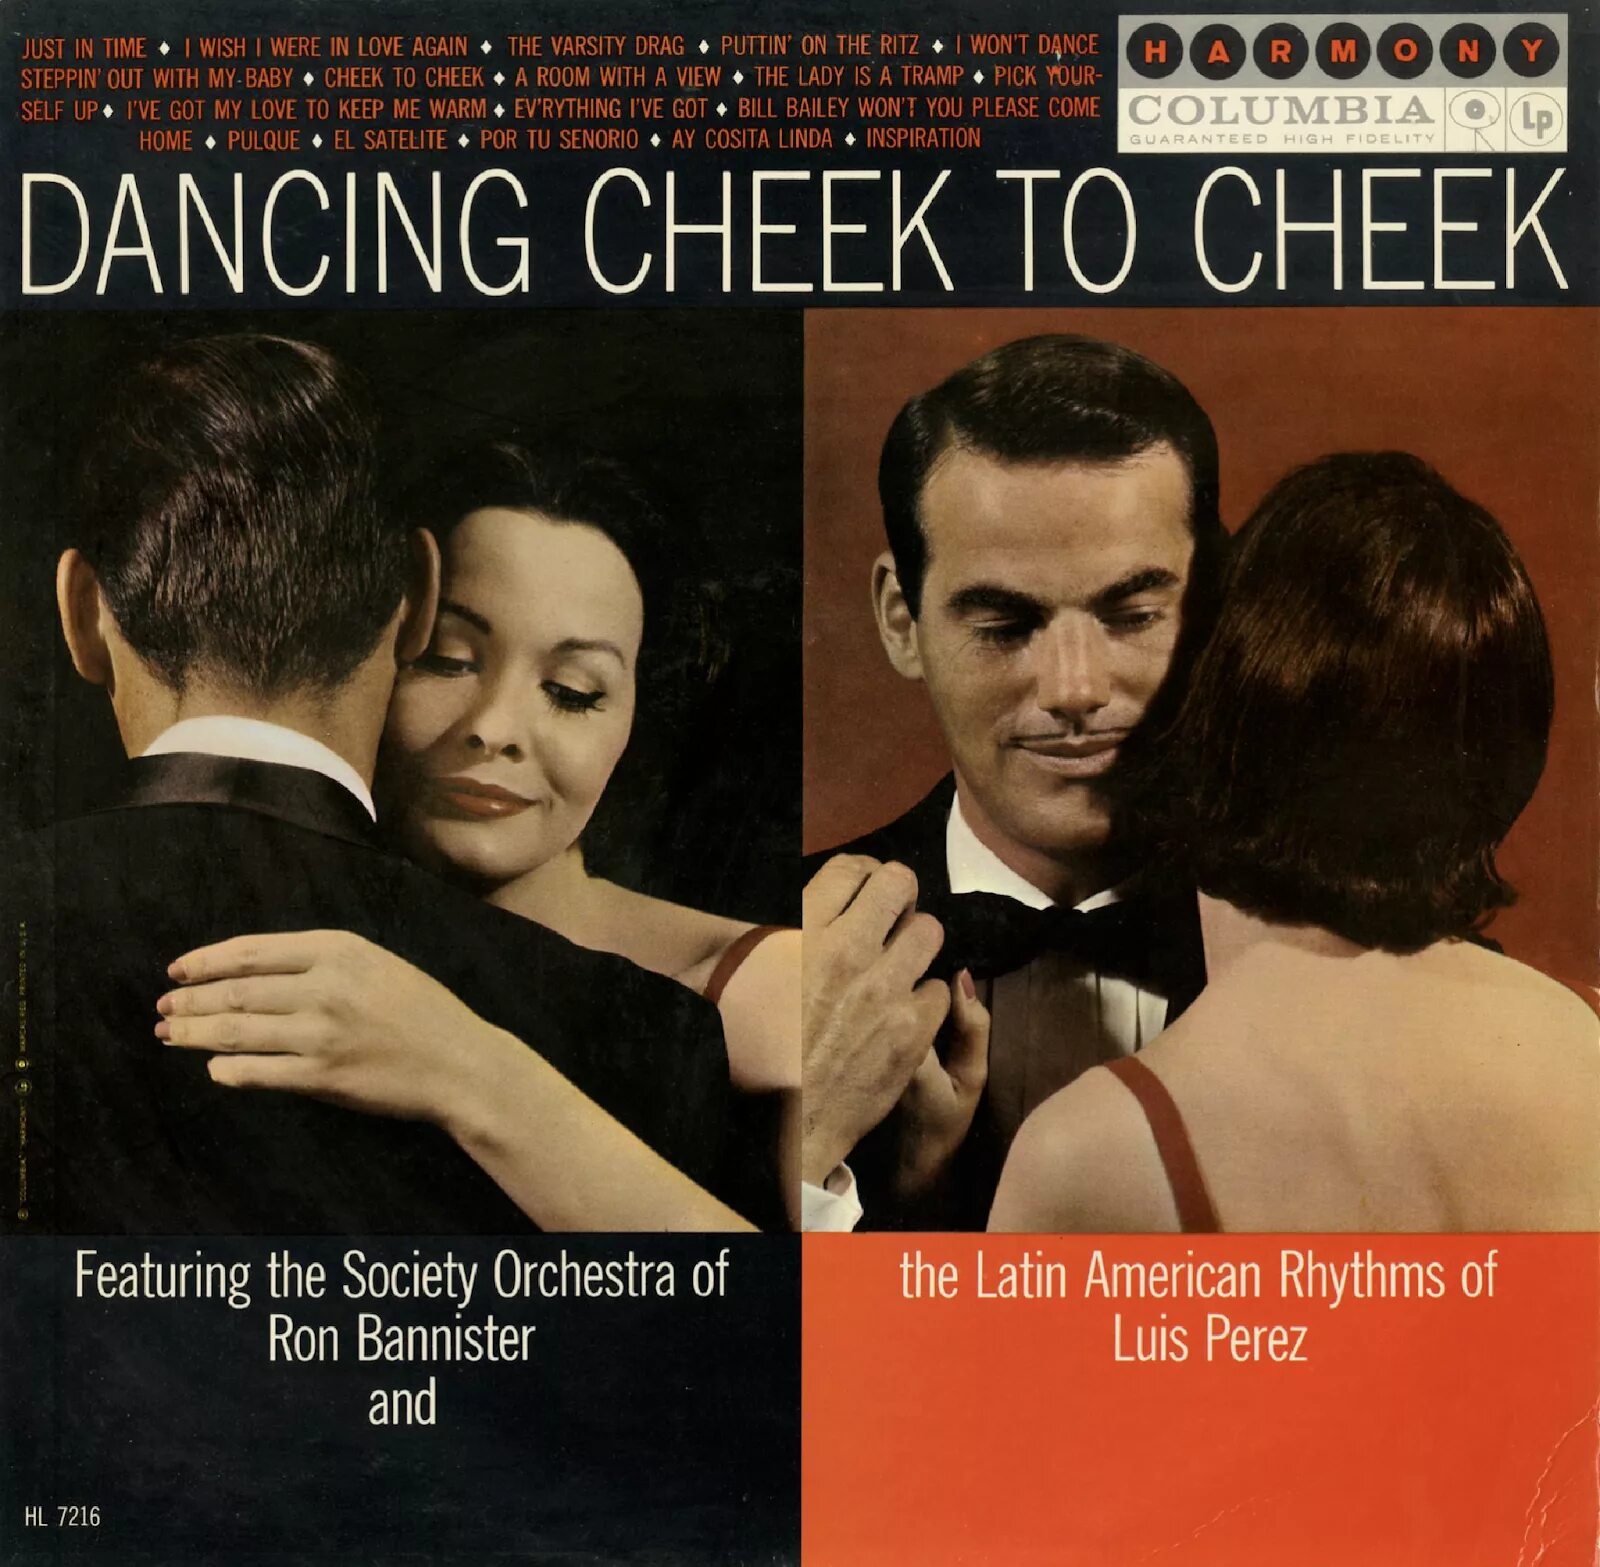 Cheek to cheek. Dancing Cheek to Cheek. Dancing Cheek to Cheek фильм. Dominic frontiere and his Orchestra.